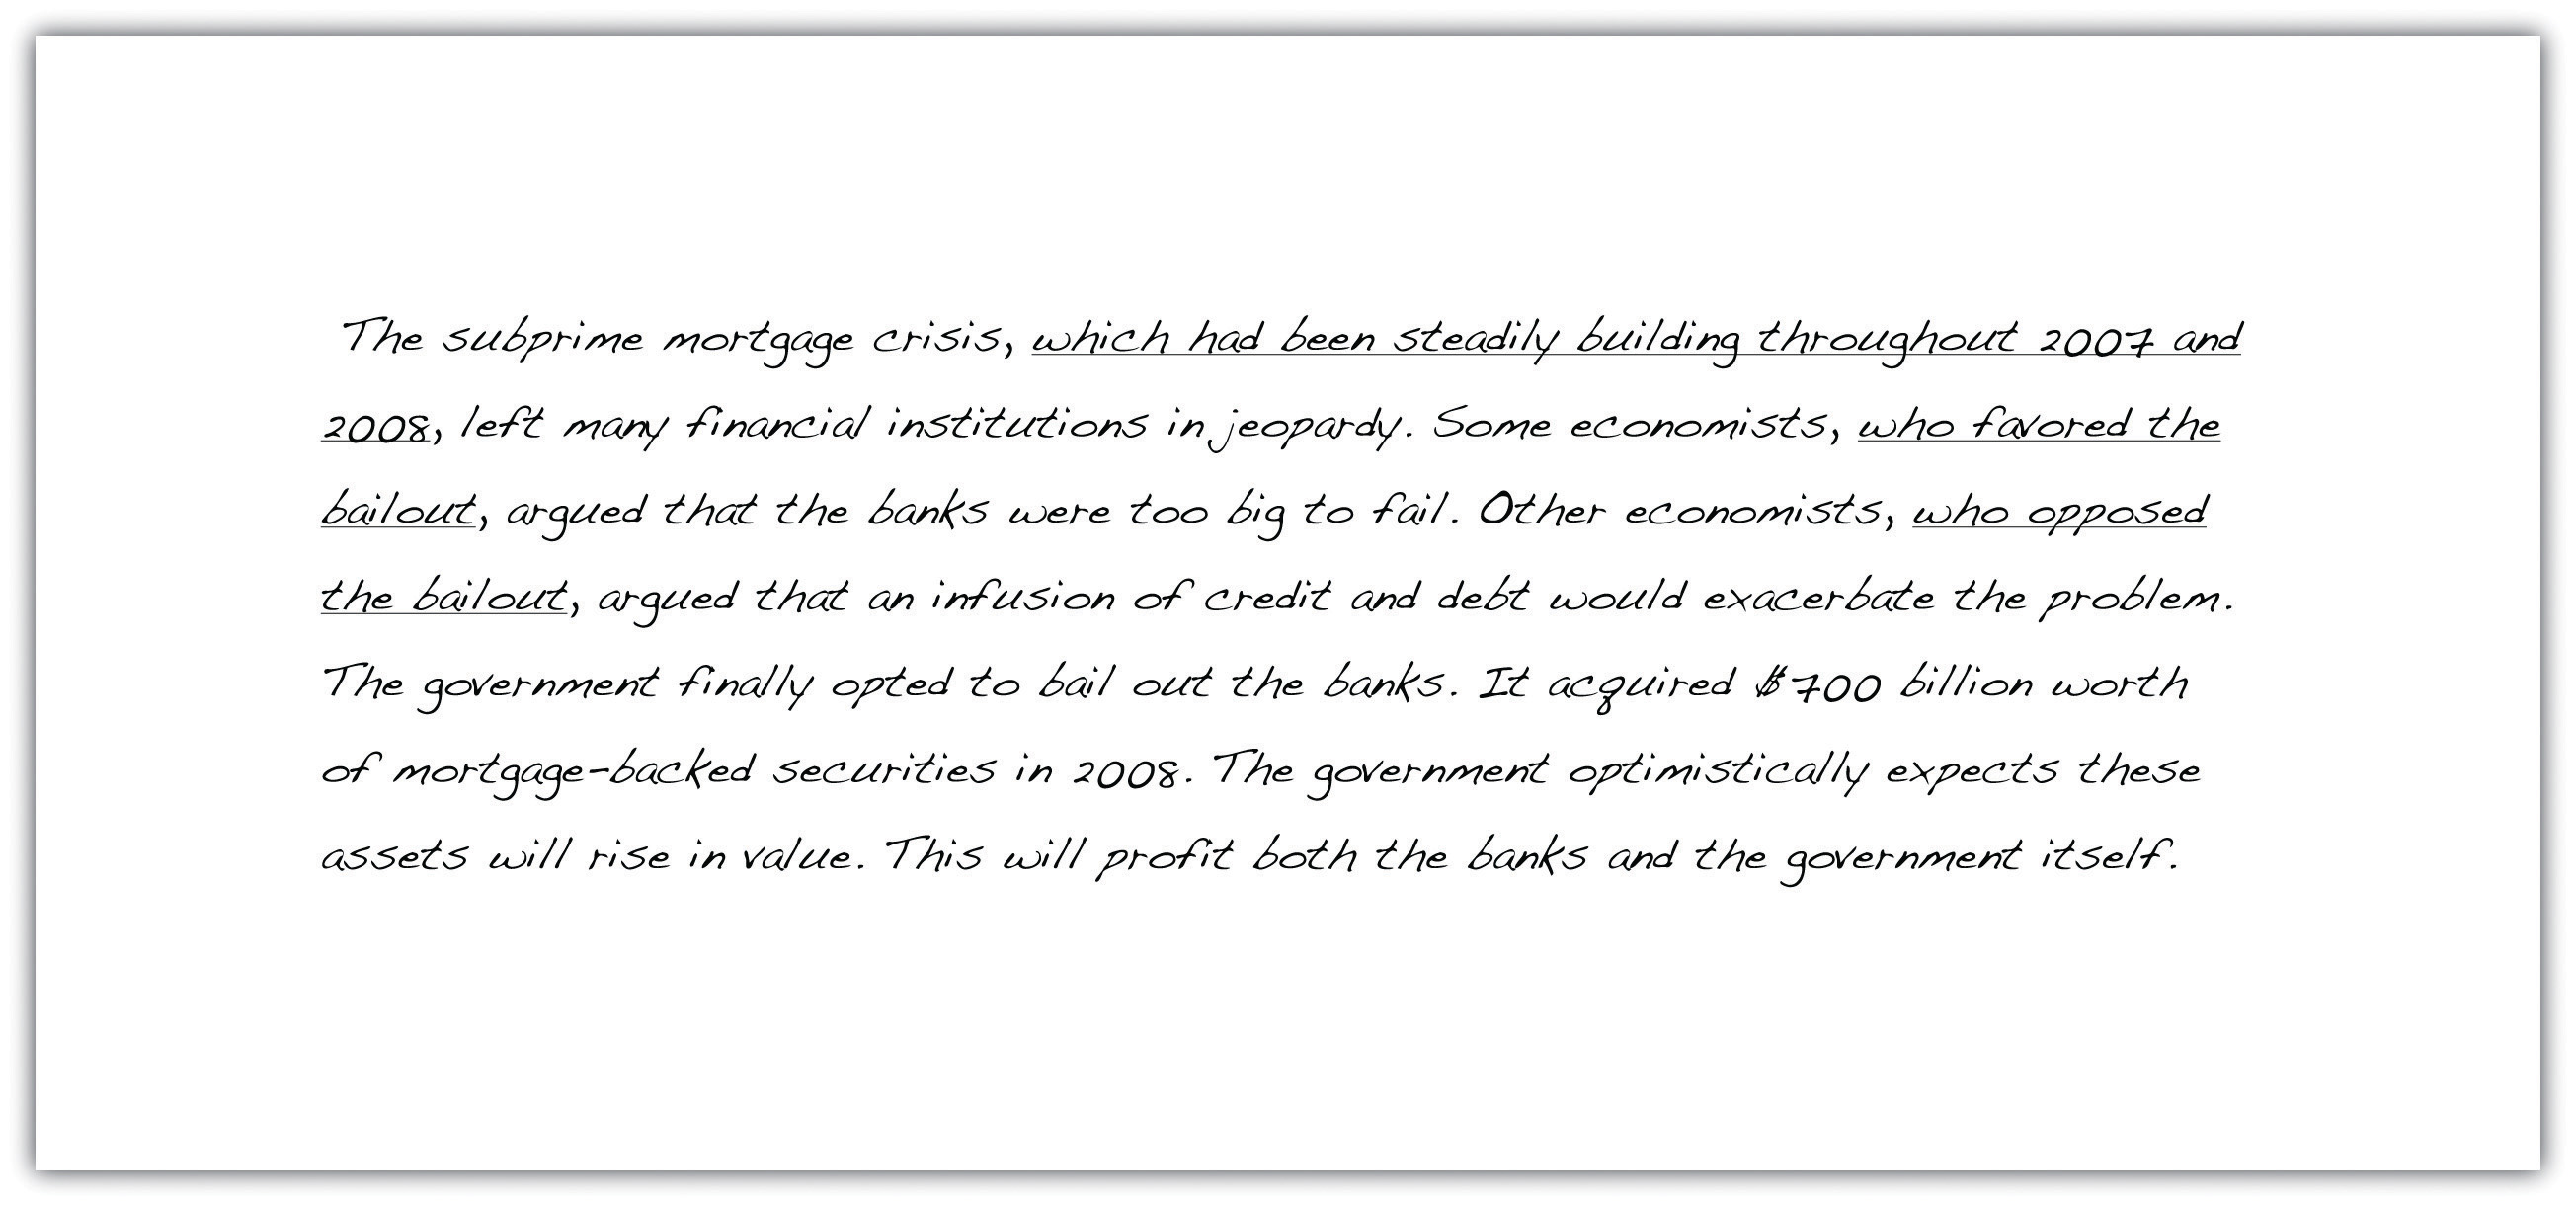 The subprime mortgage crisis, which had been steadily building throughout 2007 and 2008, left many financial institutions in jeopardy. Some economists, who favored the bailout, argued that the banks were too big to fail. Other economists, who opposed the bailout, argued that an infusion of credit and debt would exacerbate the problem. The government finally opted to bail out the banks. It acquired $700 billion worth of mortgage-backed securities in 2008 The government optimistically expects these assets will rise in value. This will profit both the banks and the government itself.